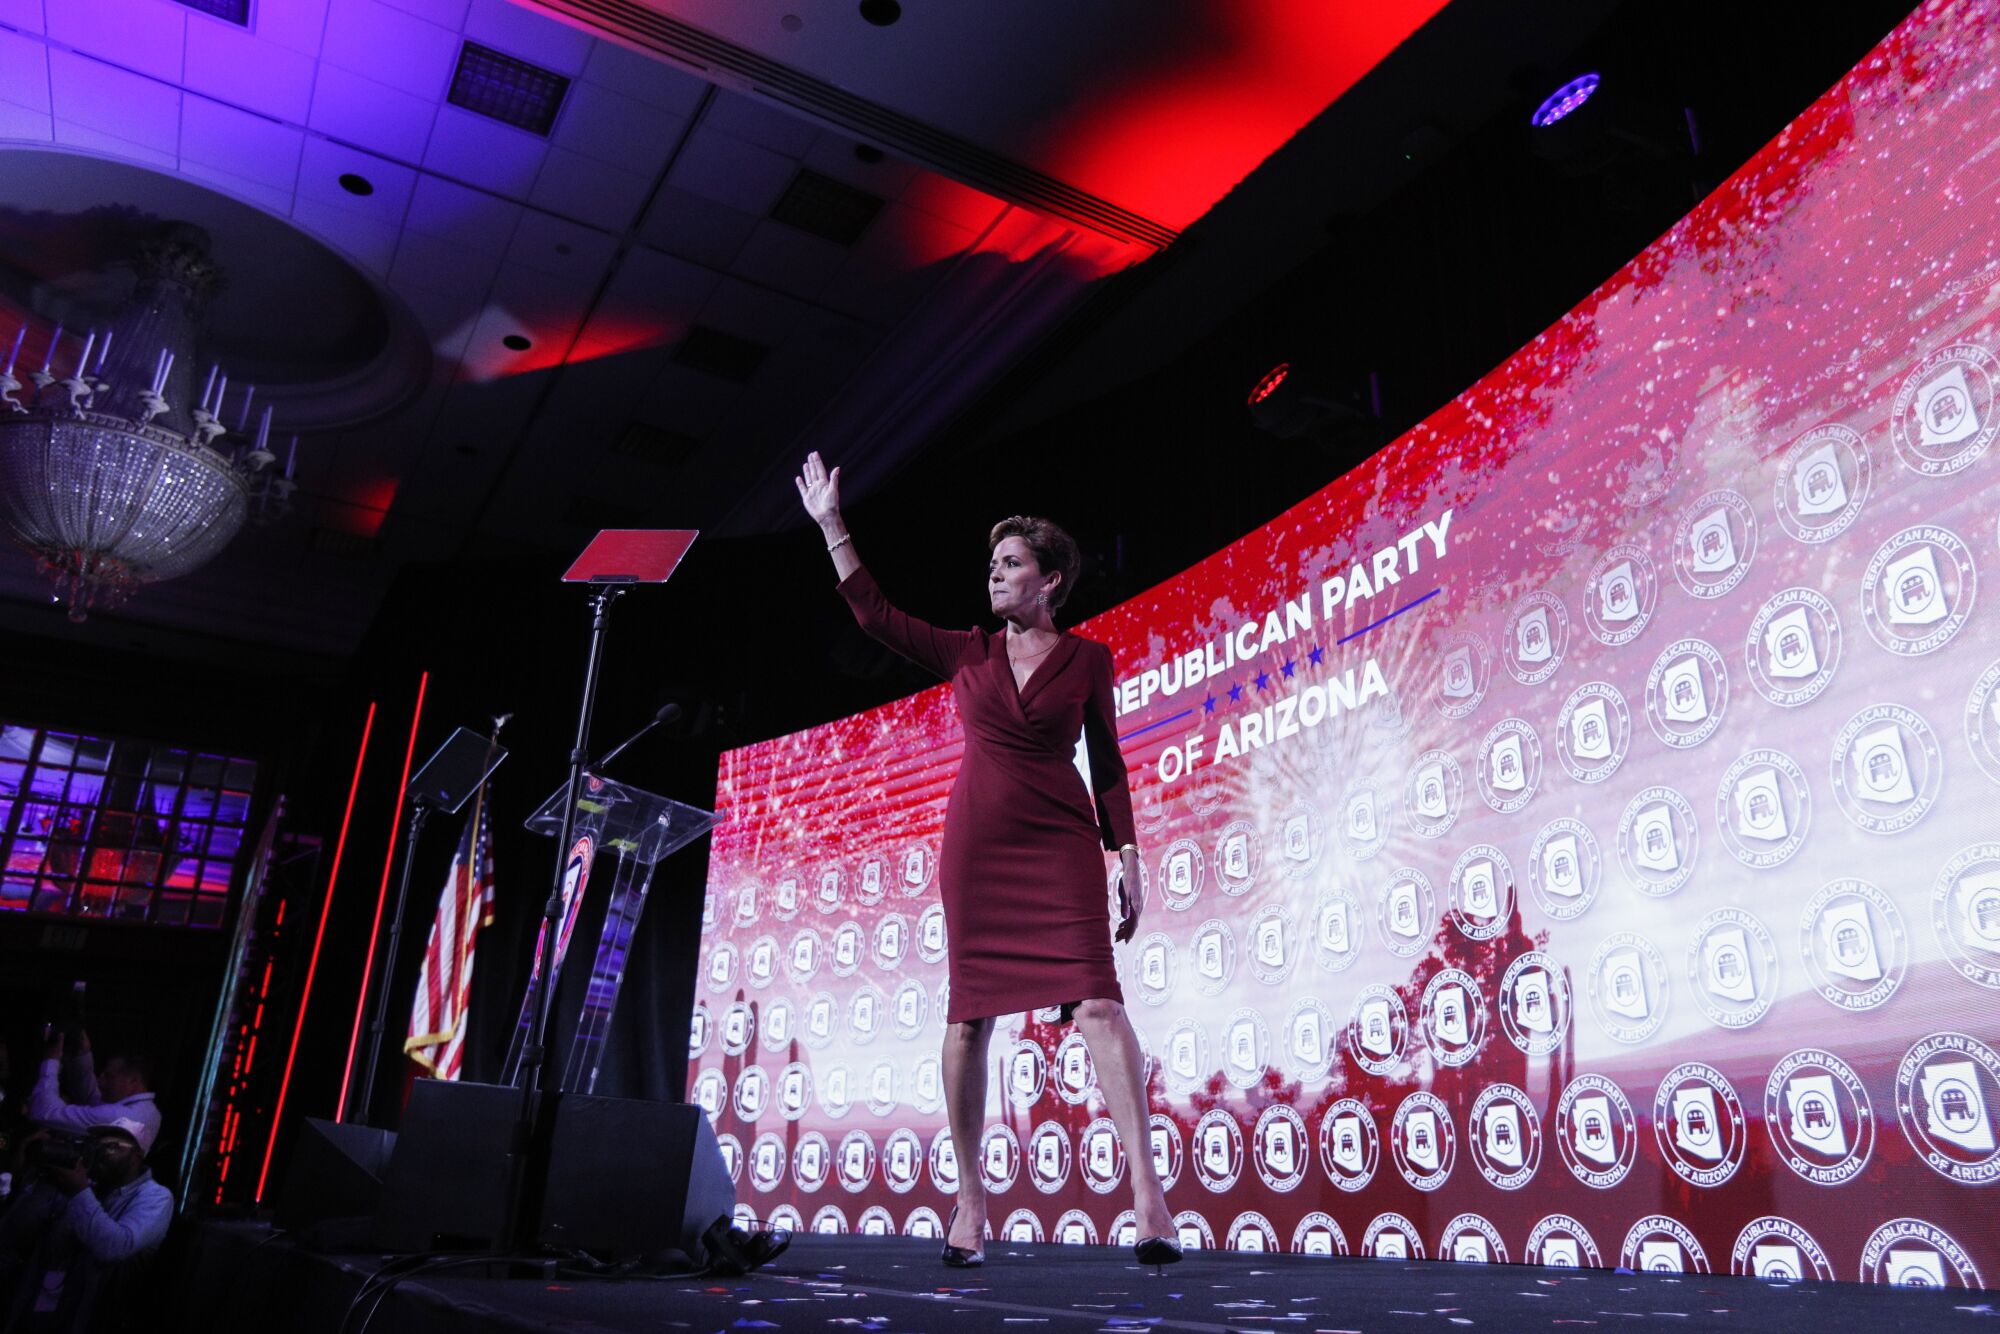 A woman waving as she walks across a stage with a red and white backdrop reading 